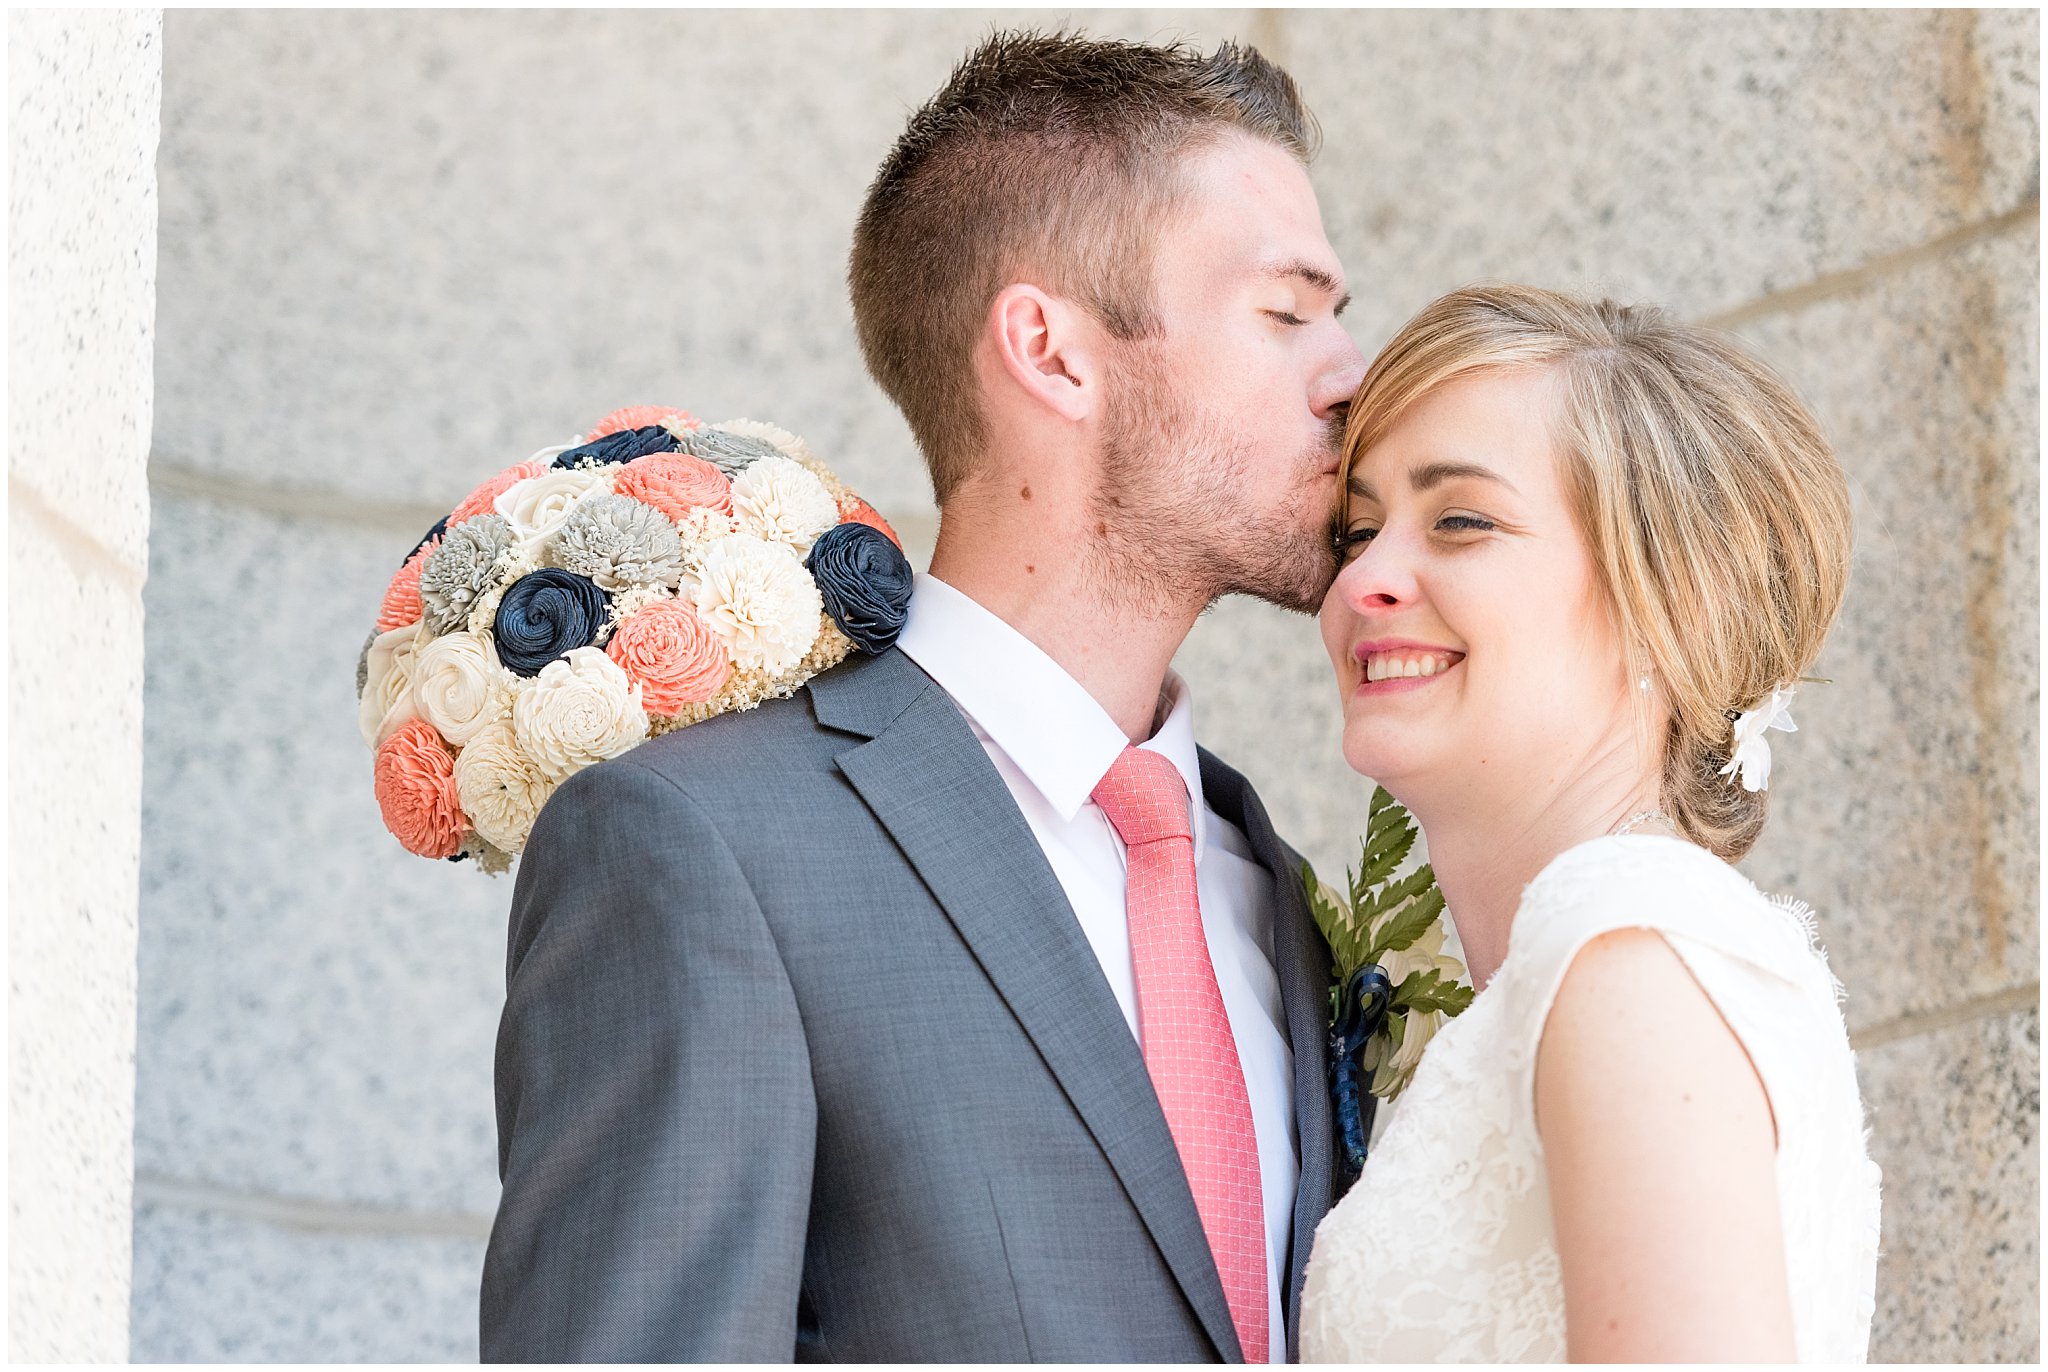 Salt Lake Temple spring wedding | Coral and grey wedding | Bride and groom pictures in the alcove